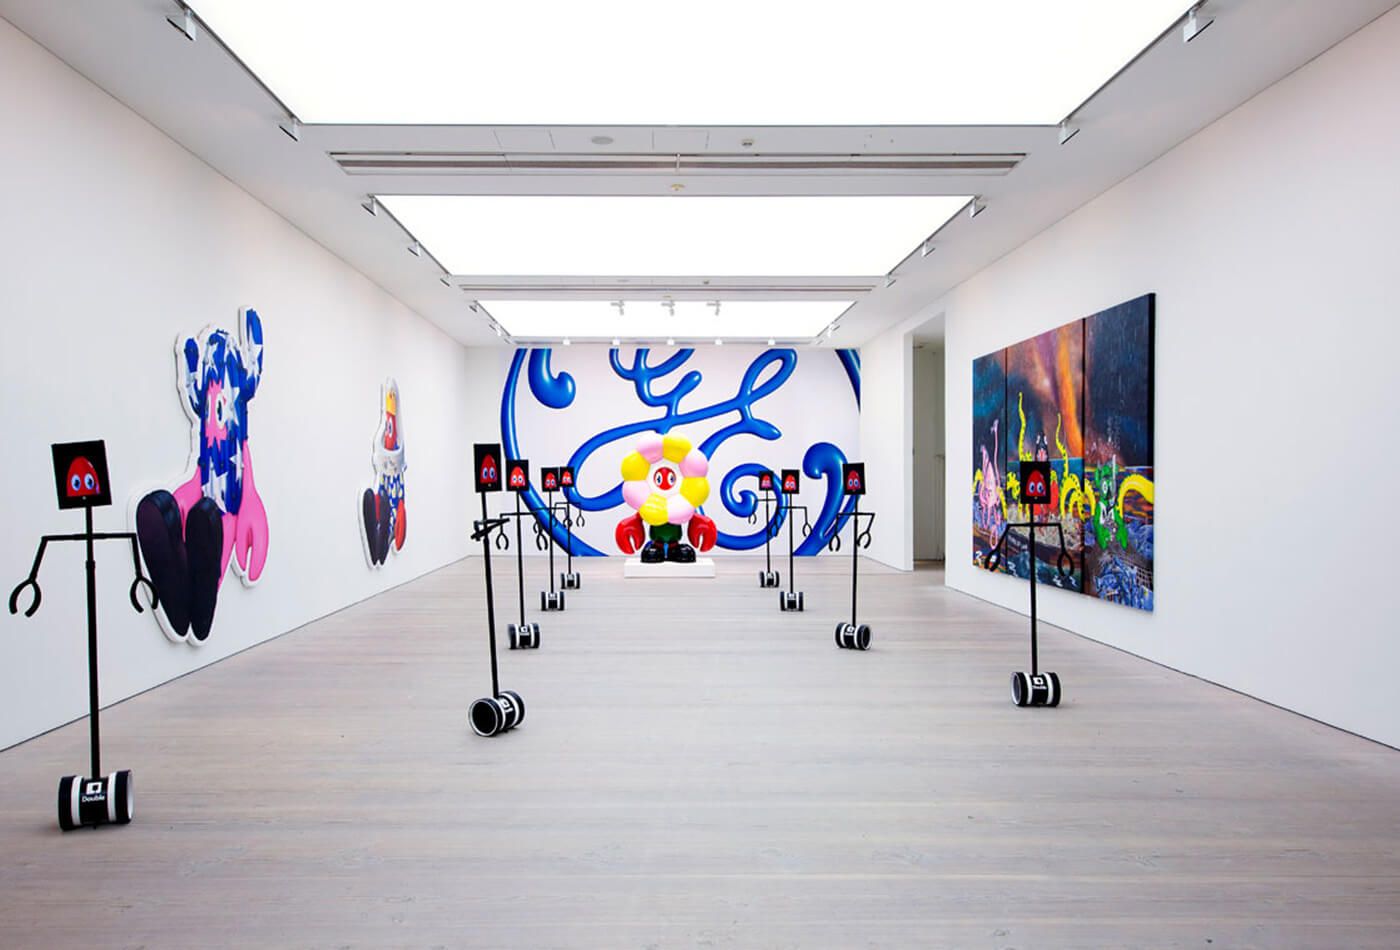 Phillip colbert exhibition, white walls and colourful art 